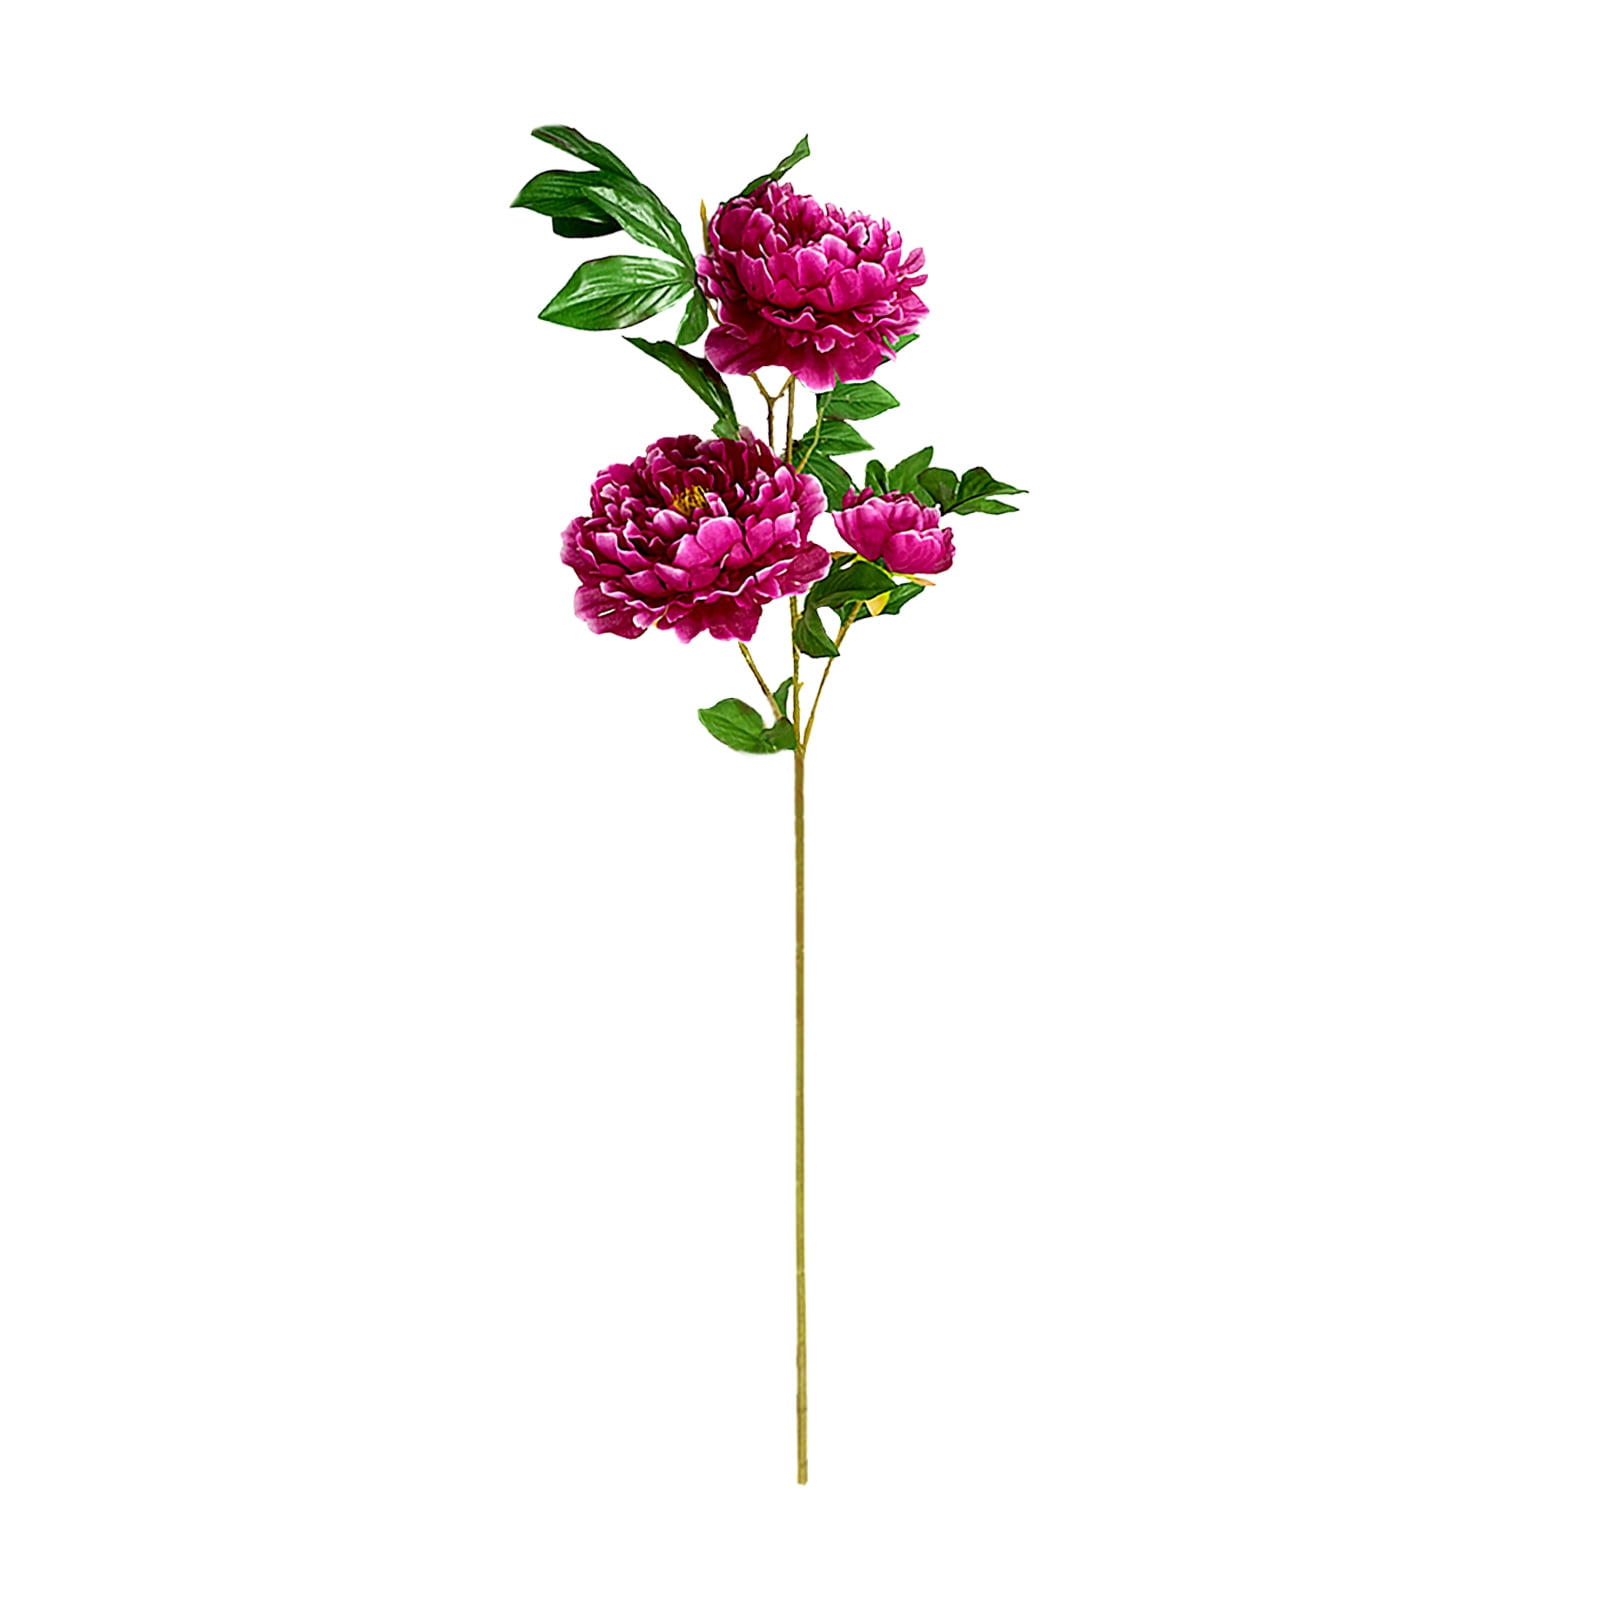 PersonalhomeD Artificial Flowers Home Decor Rich Peonies Cloth ...